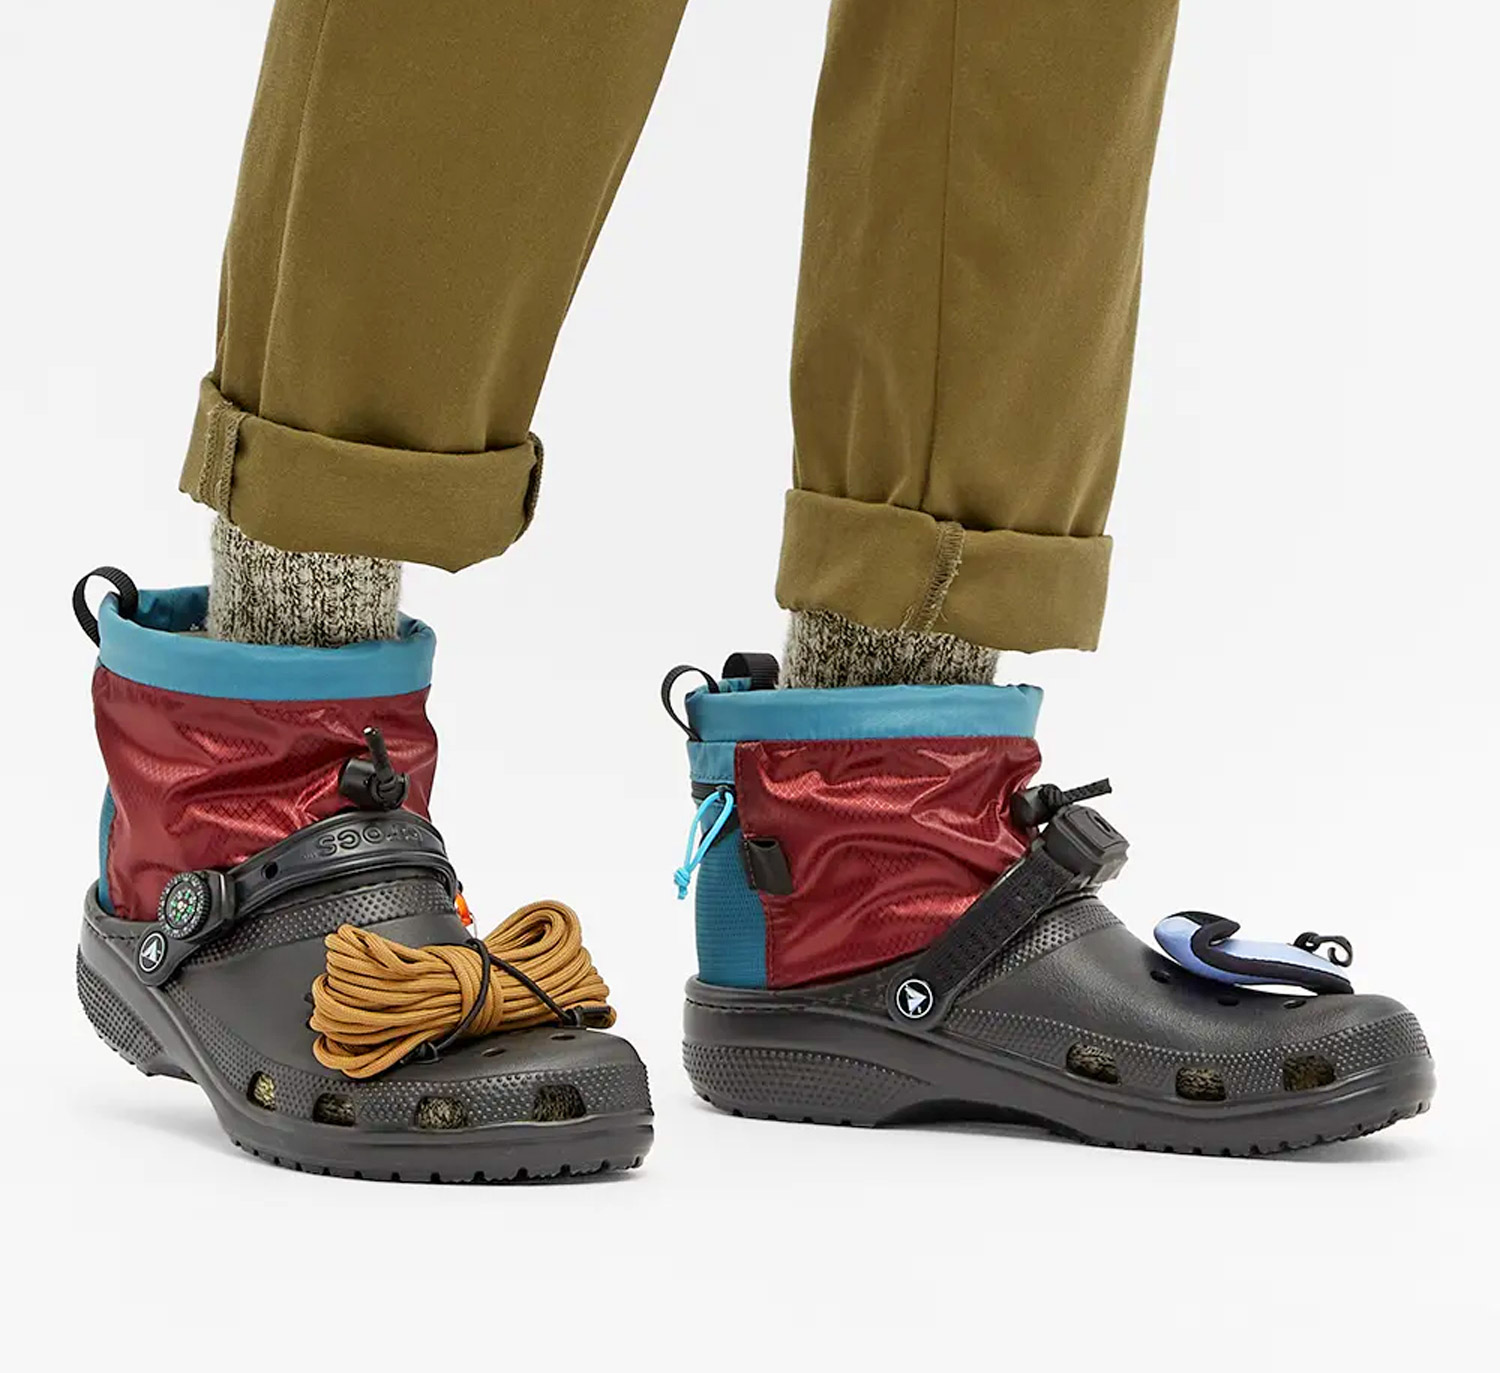 There's Now Camping Crocs That Have 